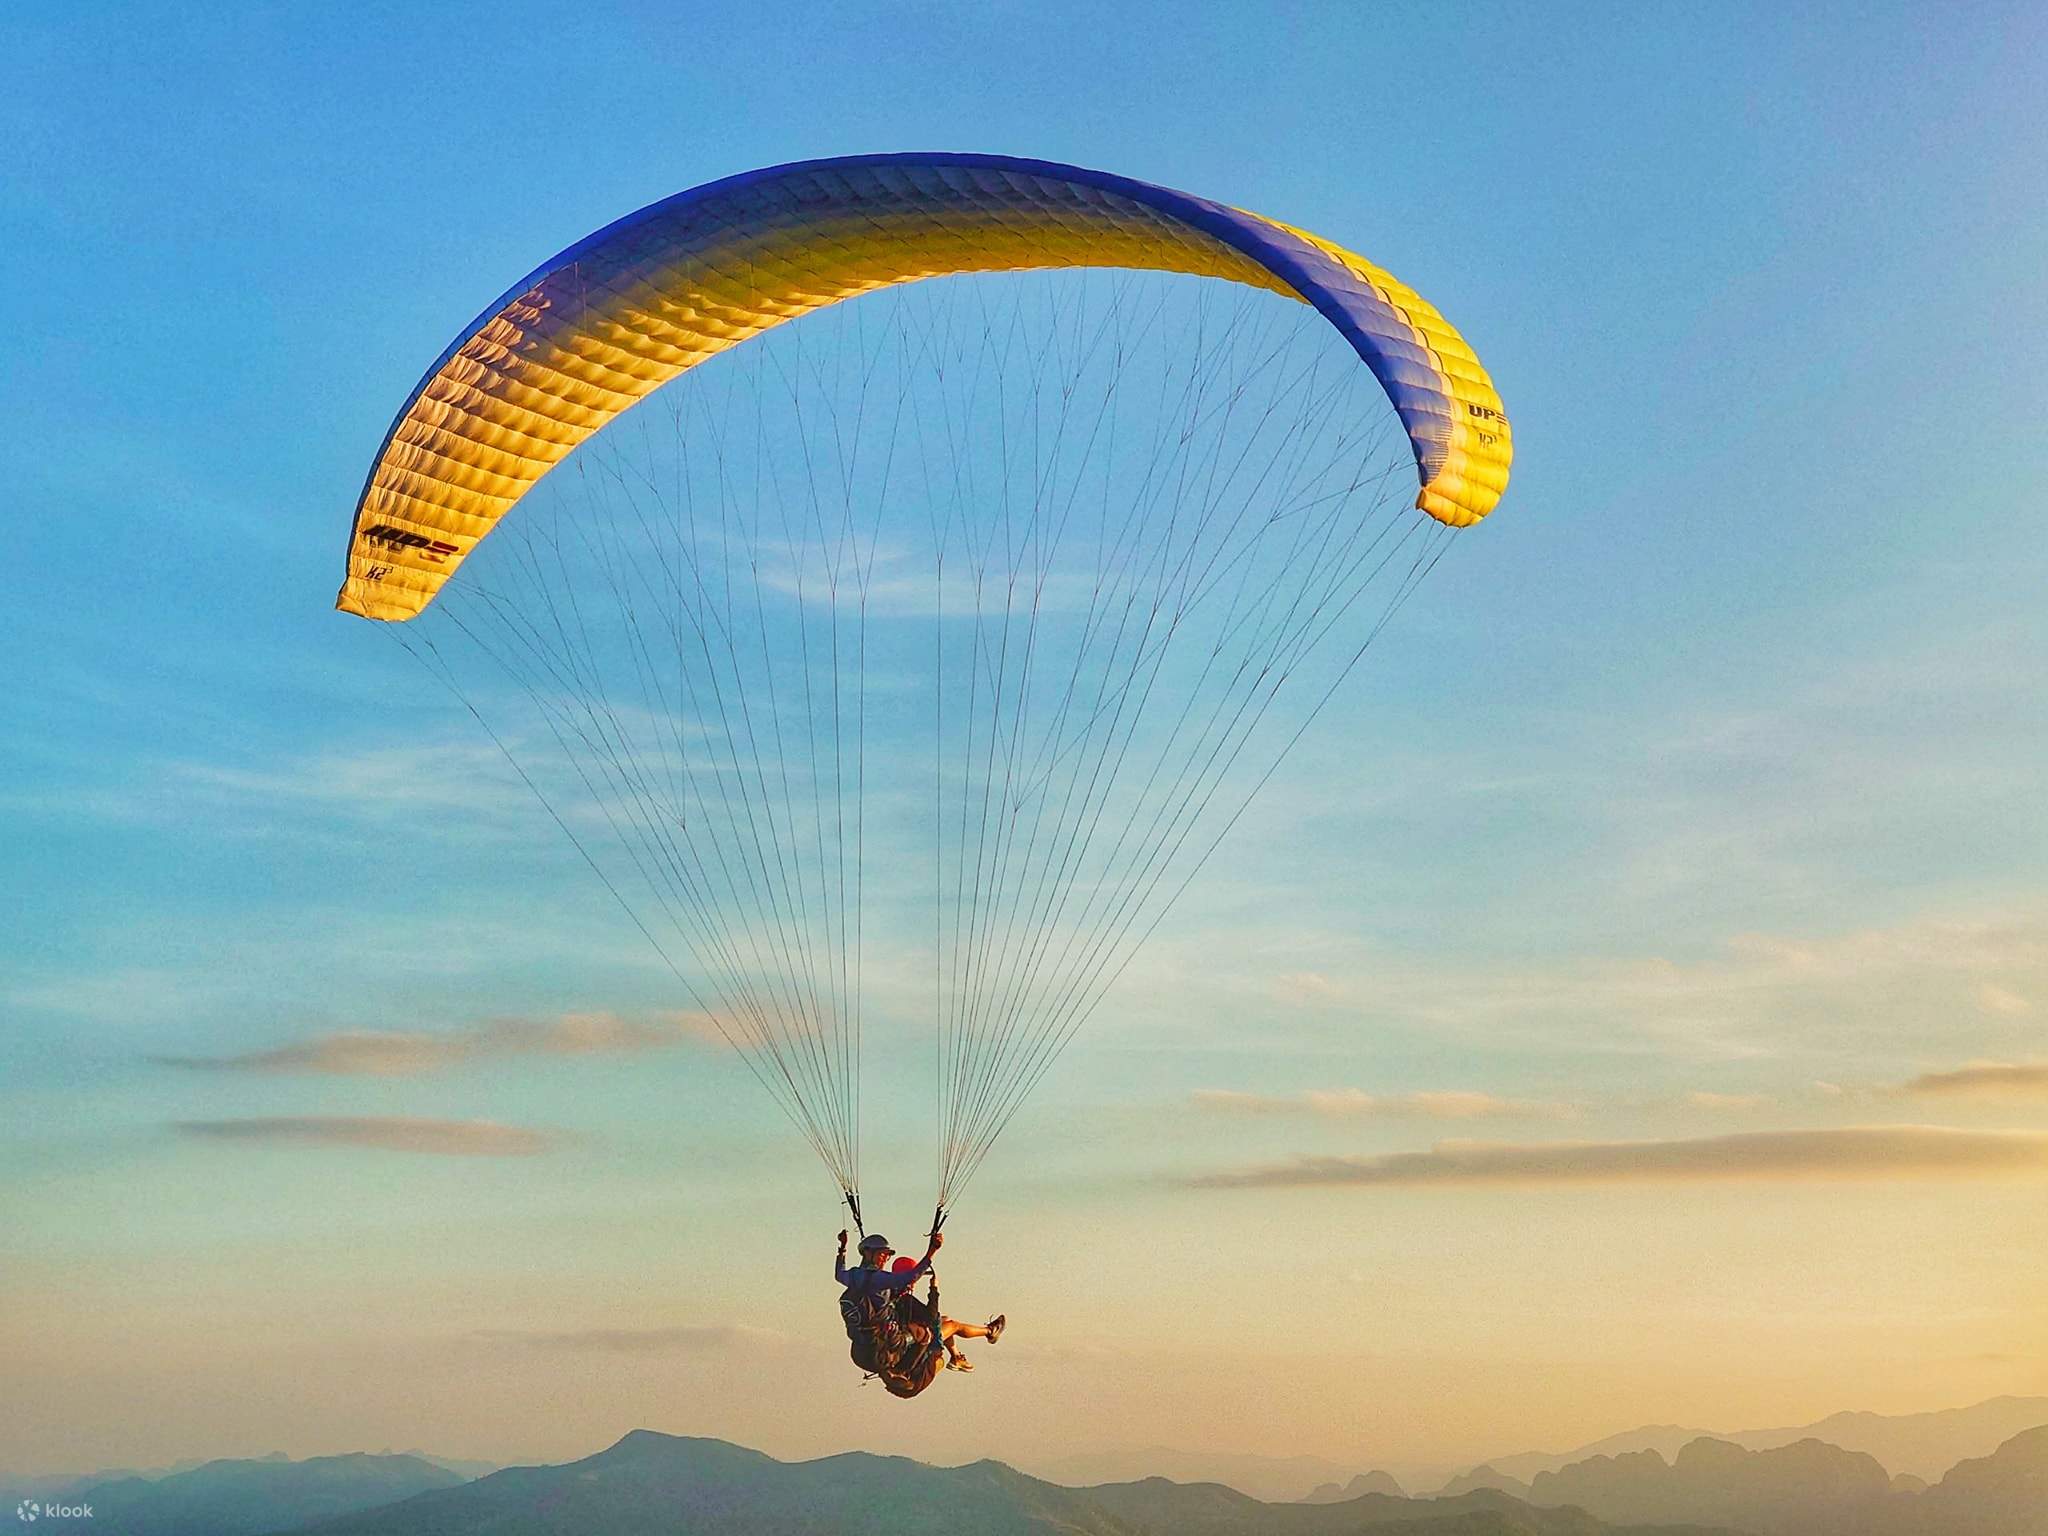 Procedures for issuing certificates of eligibility for doing the sports business for Paragliding and Kite Flying in Vietnam